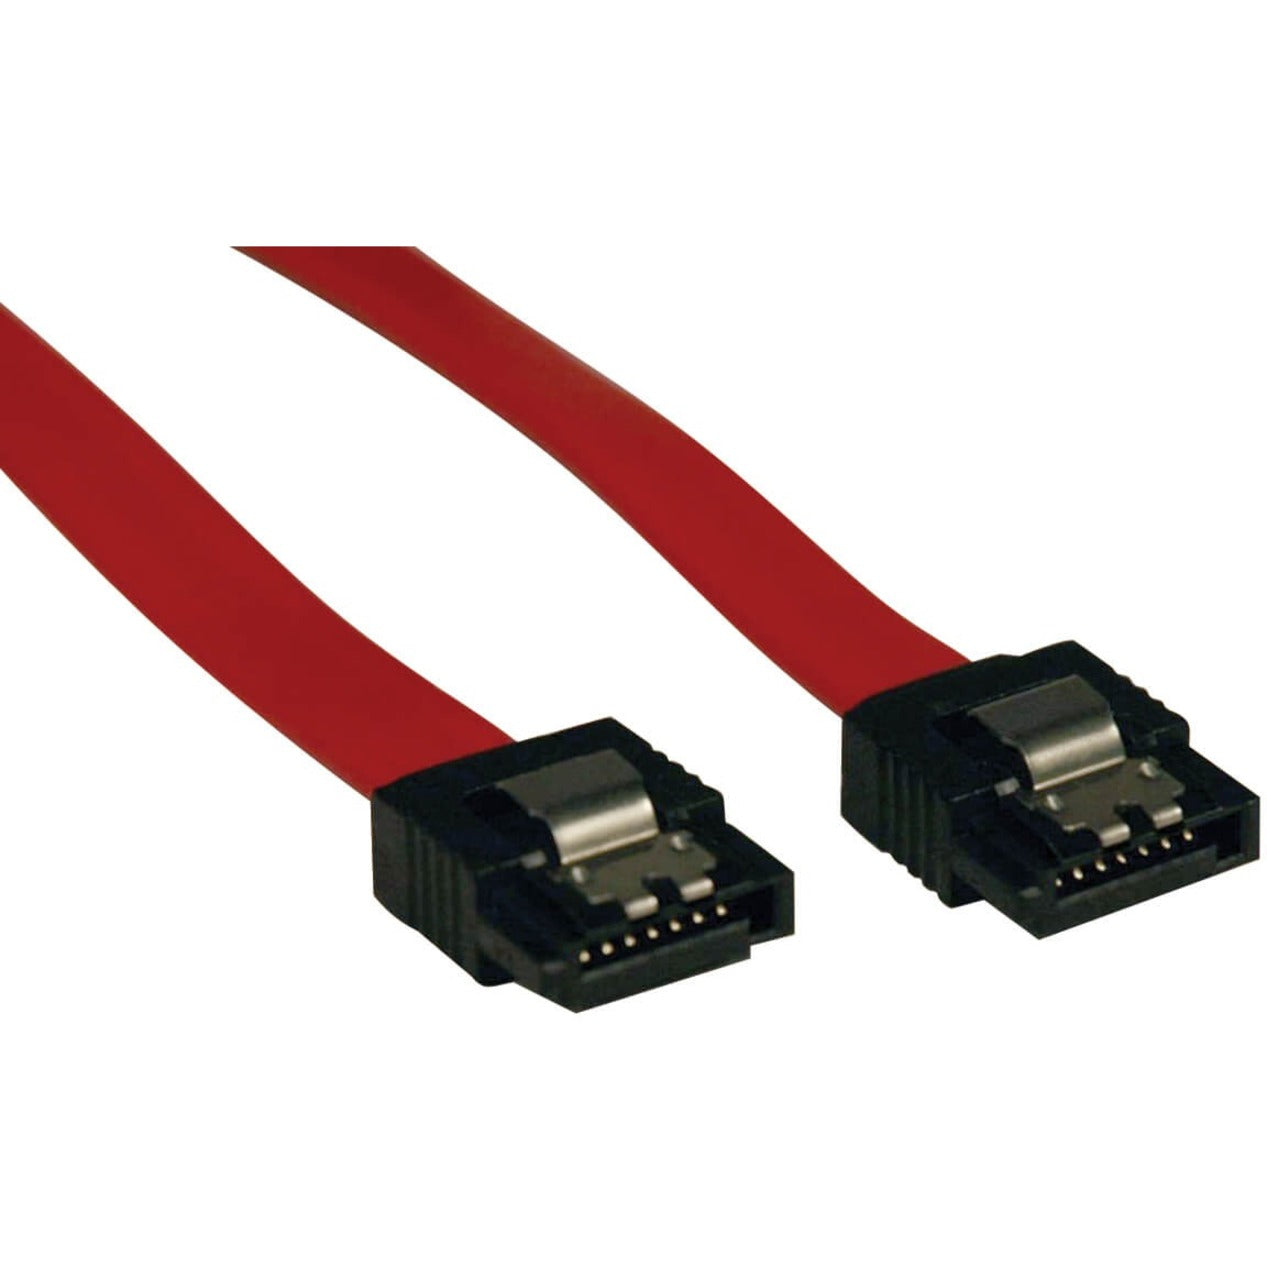 Tripp Lite P940-19I Serial ATA (7-pin) Cable, 19-in. Signal Cable 7Pin/7Pin